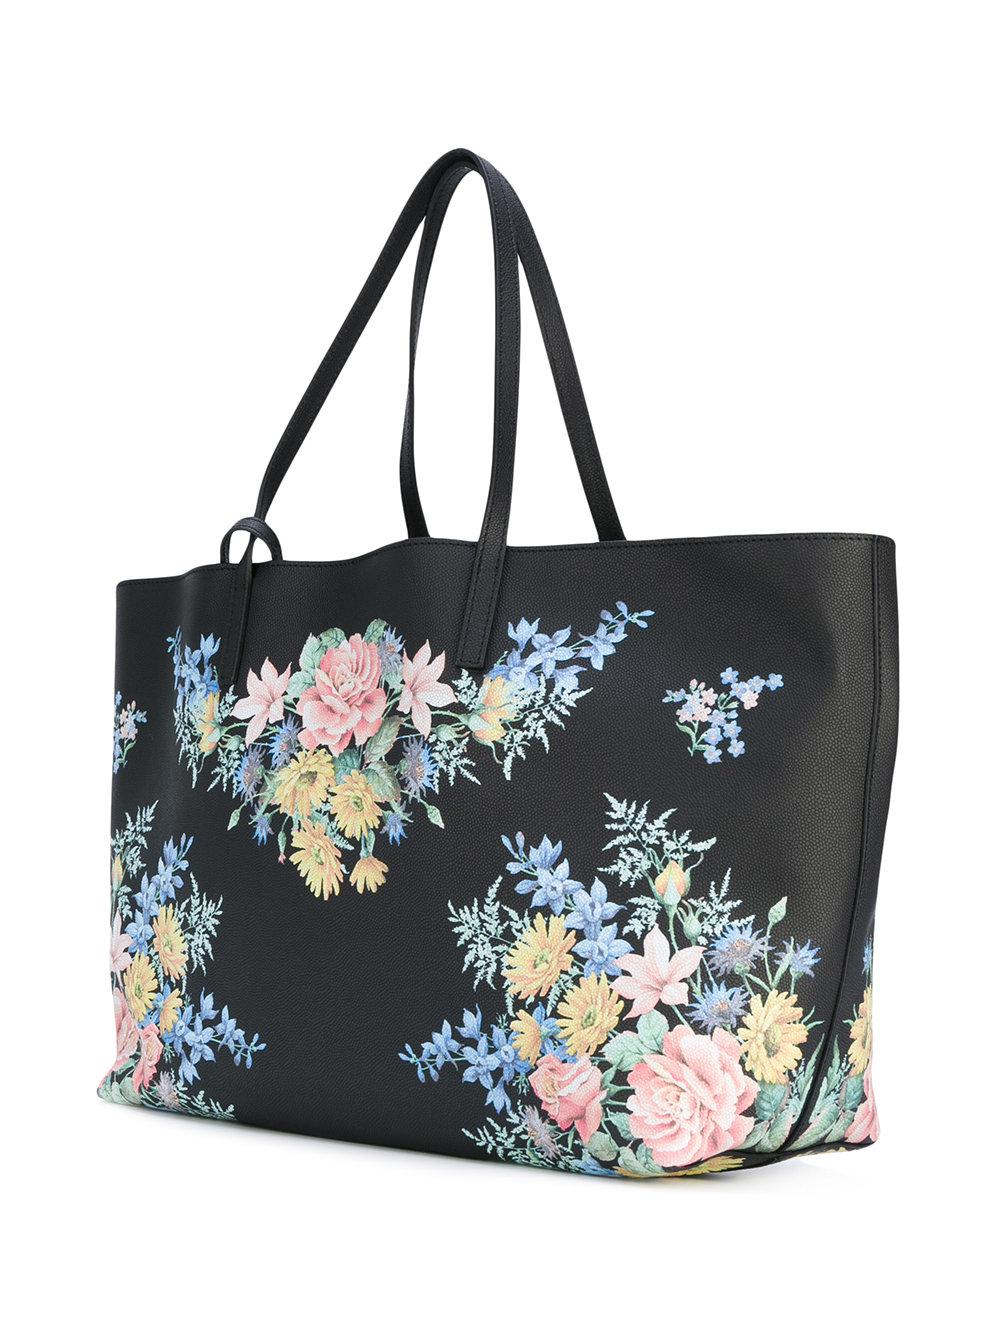 Alexander McQueen Leather Floral Tote Bag in Black - Lyst